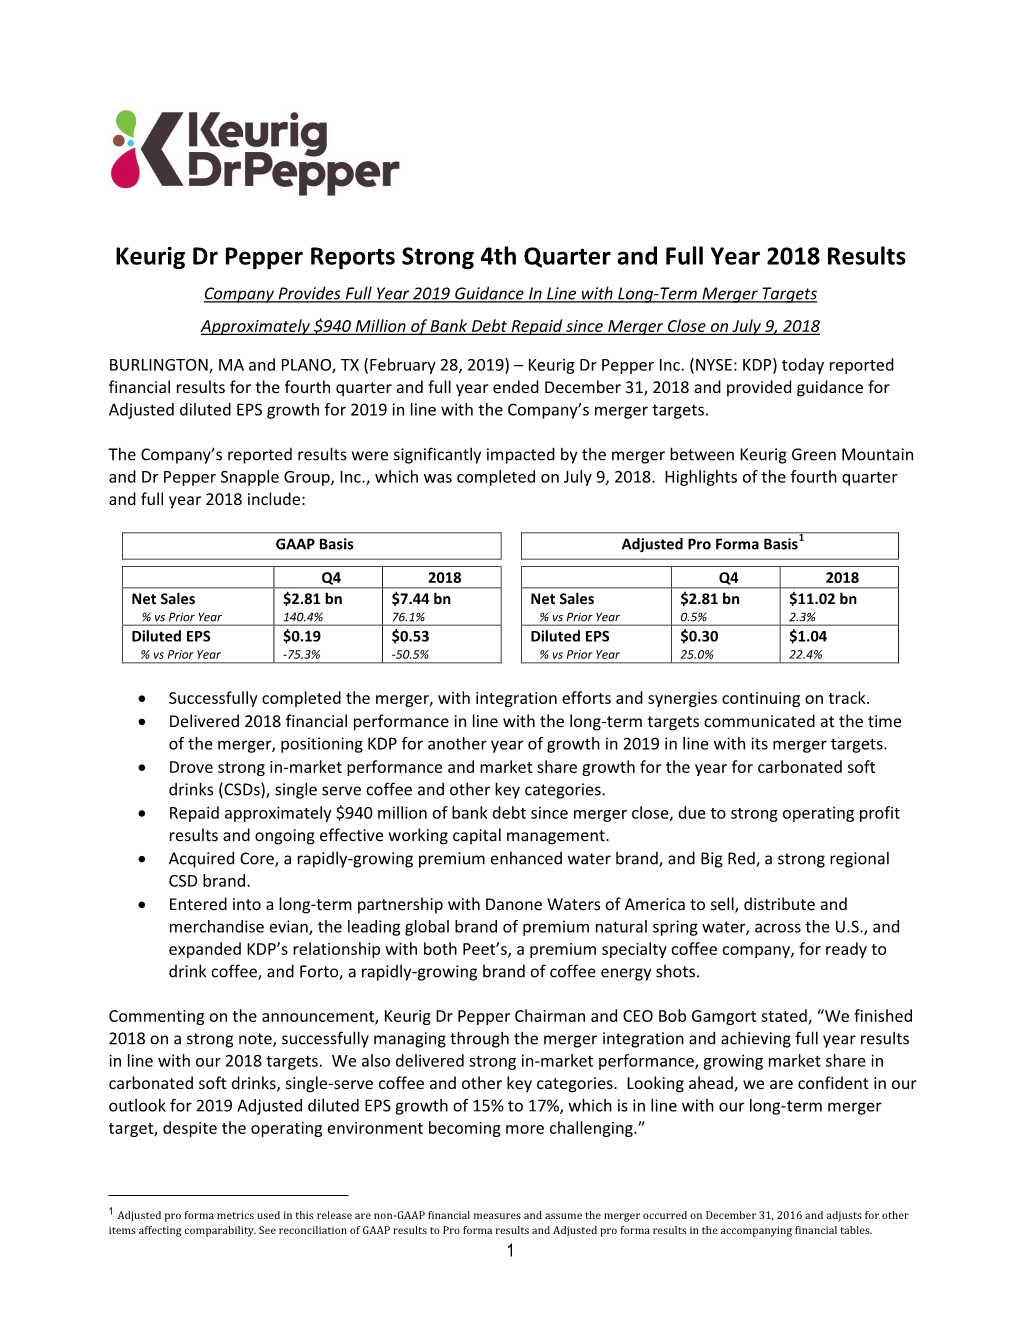 Keurig Dr Pepper Reports Strong 4Th Quarter and Full Year 2018 Results